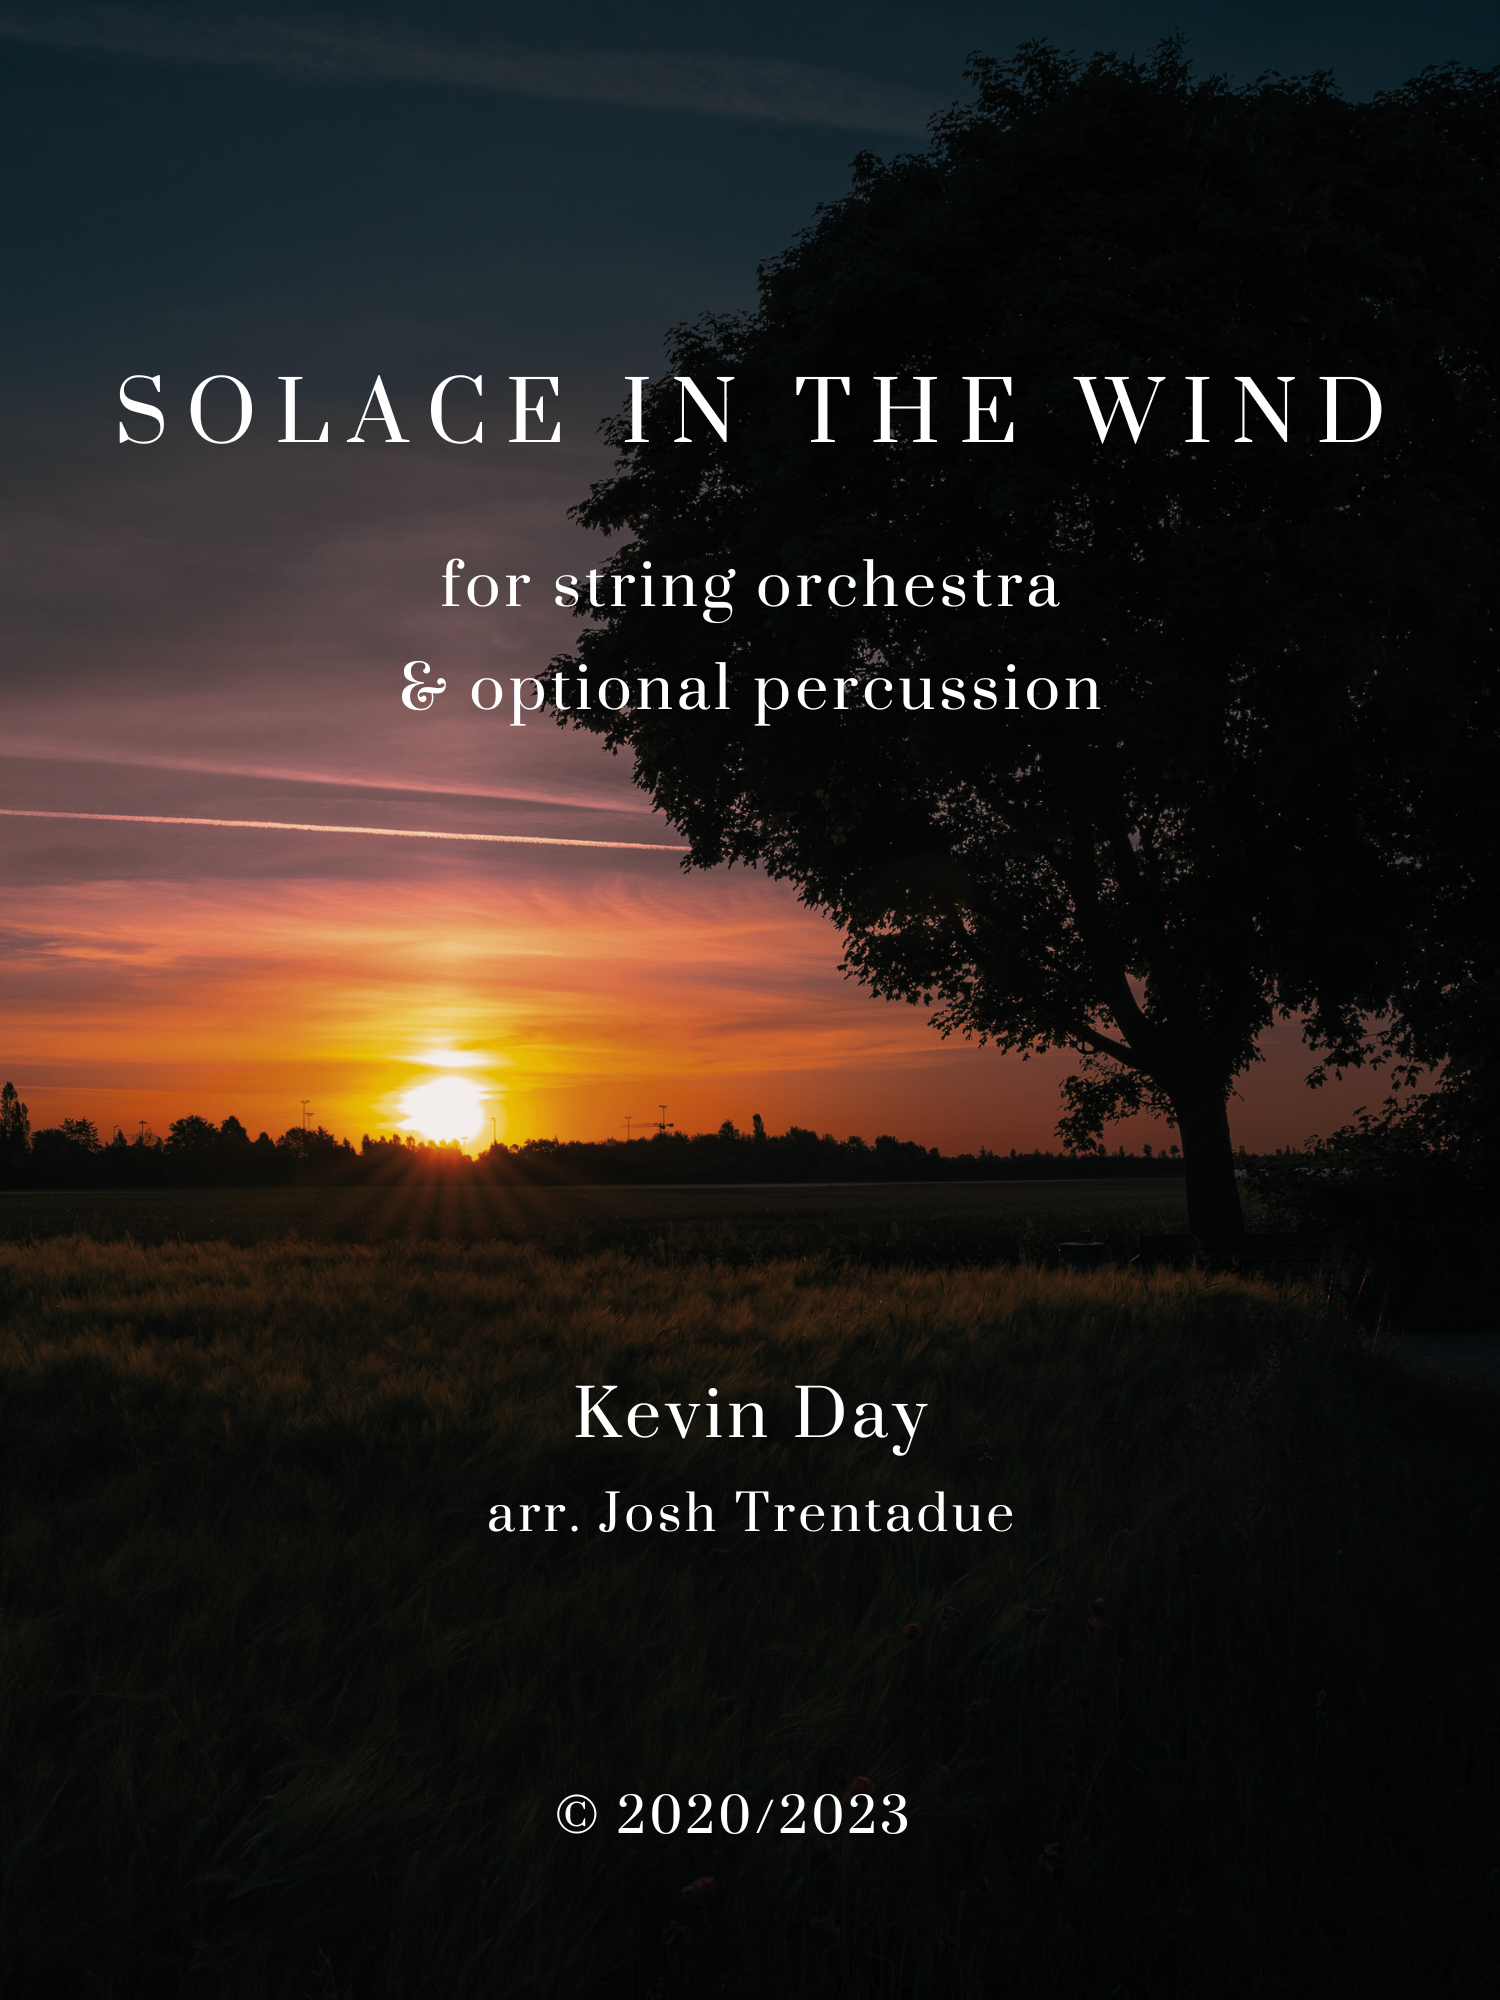 Solace In The Wind (String Orchestra Version) by Kevin Day arr. Josh Trentadue